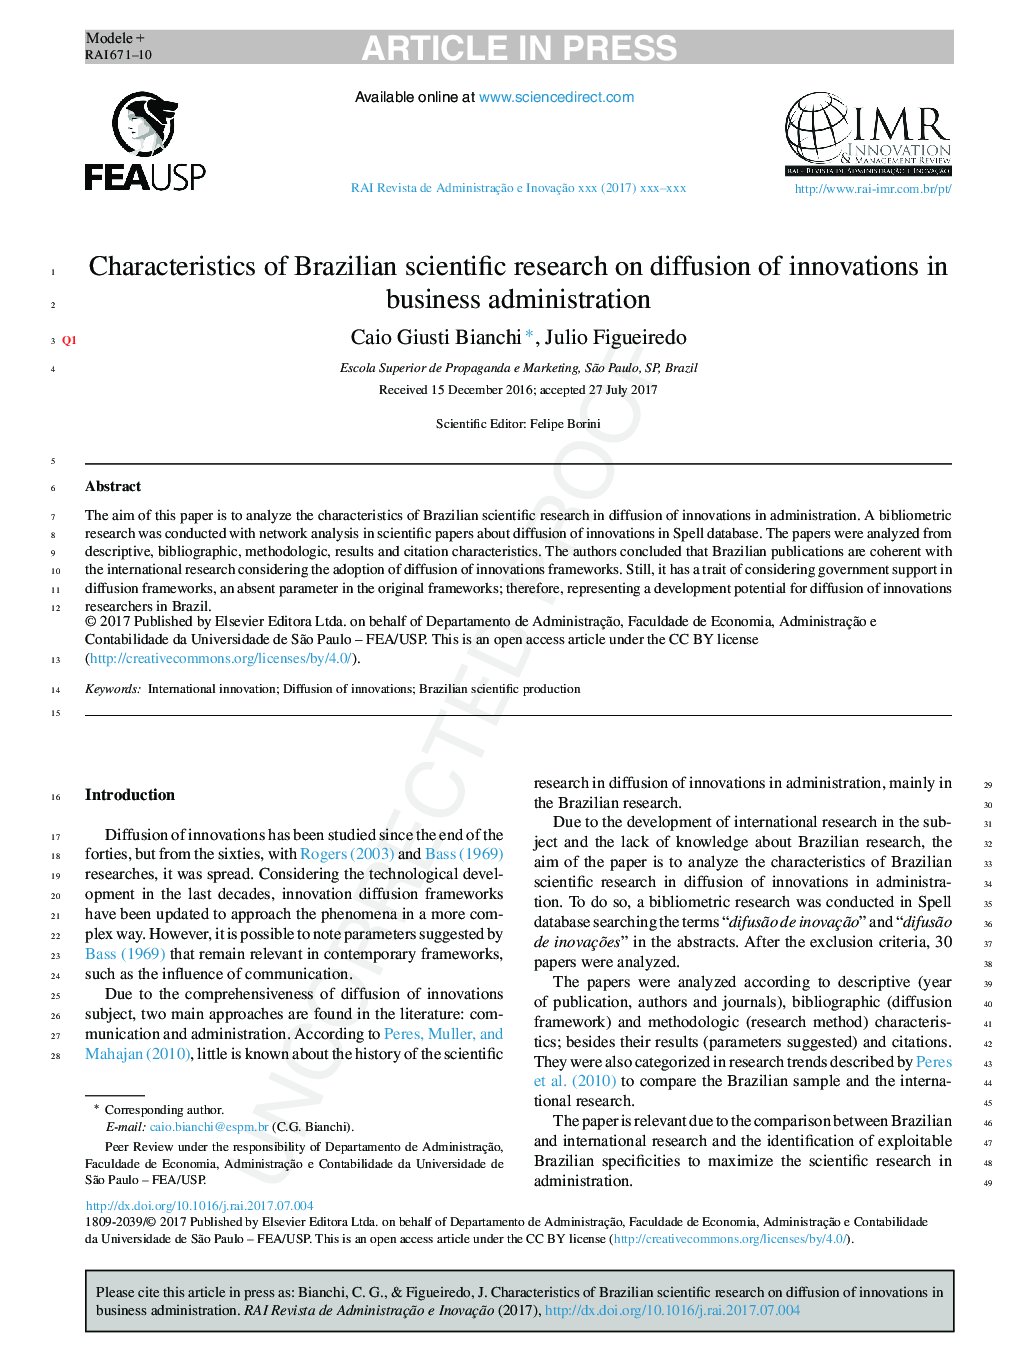 Characteristics of Brazilian scientific research on diffusion of innovations in business administration